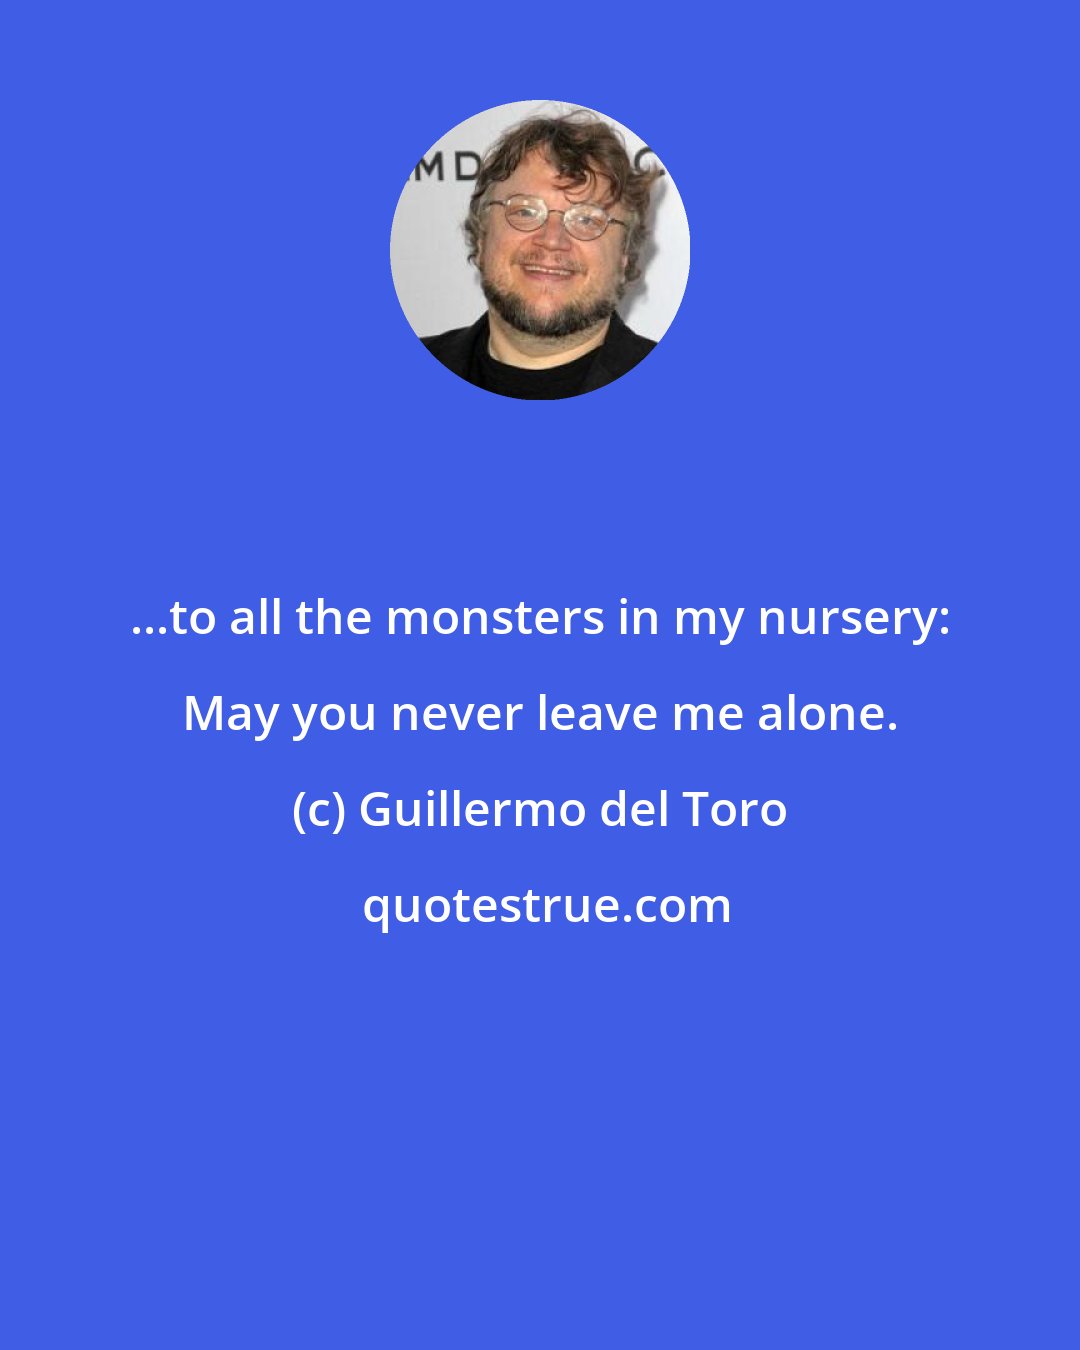 Guillermo del Toro: ...to all the monsters in my nursery: May you never leave me alone.